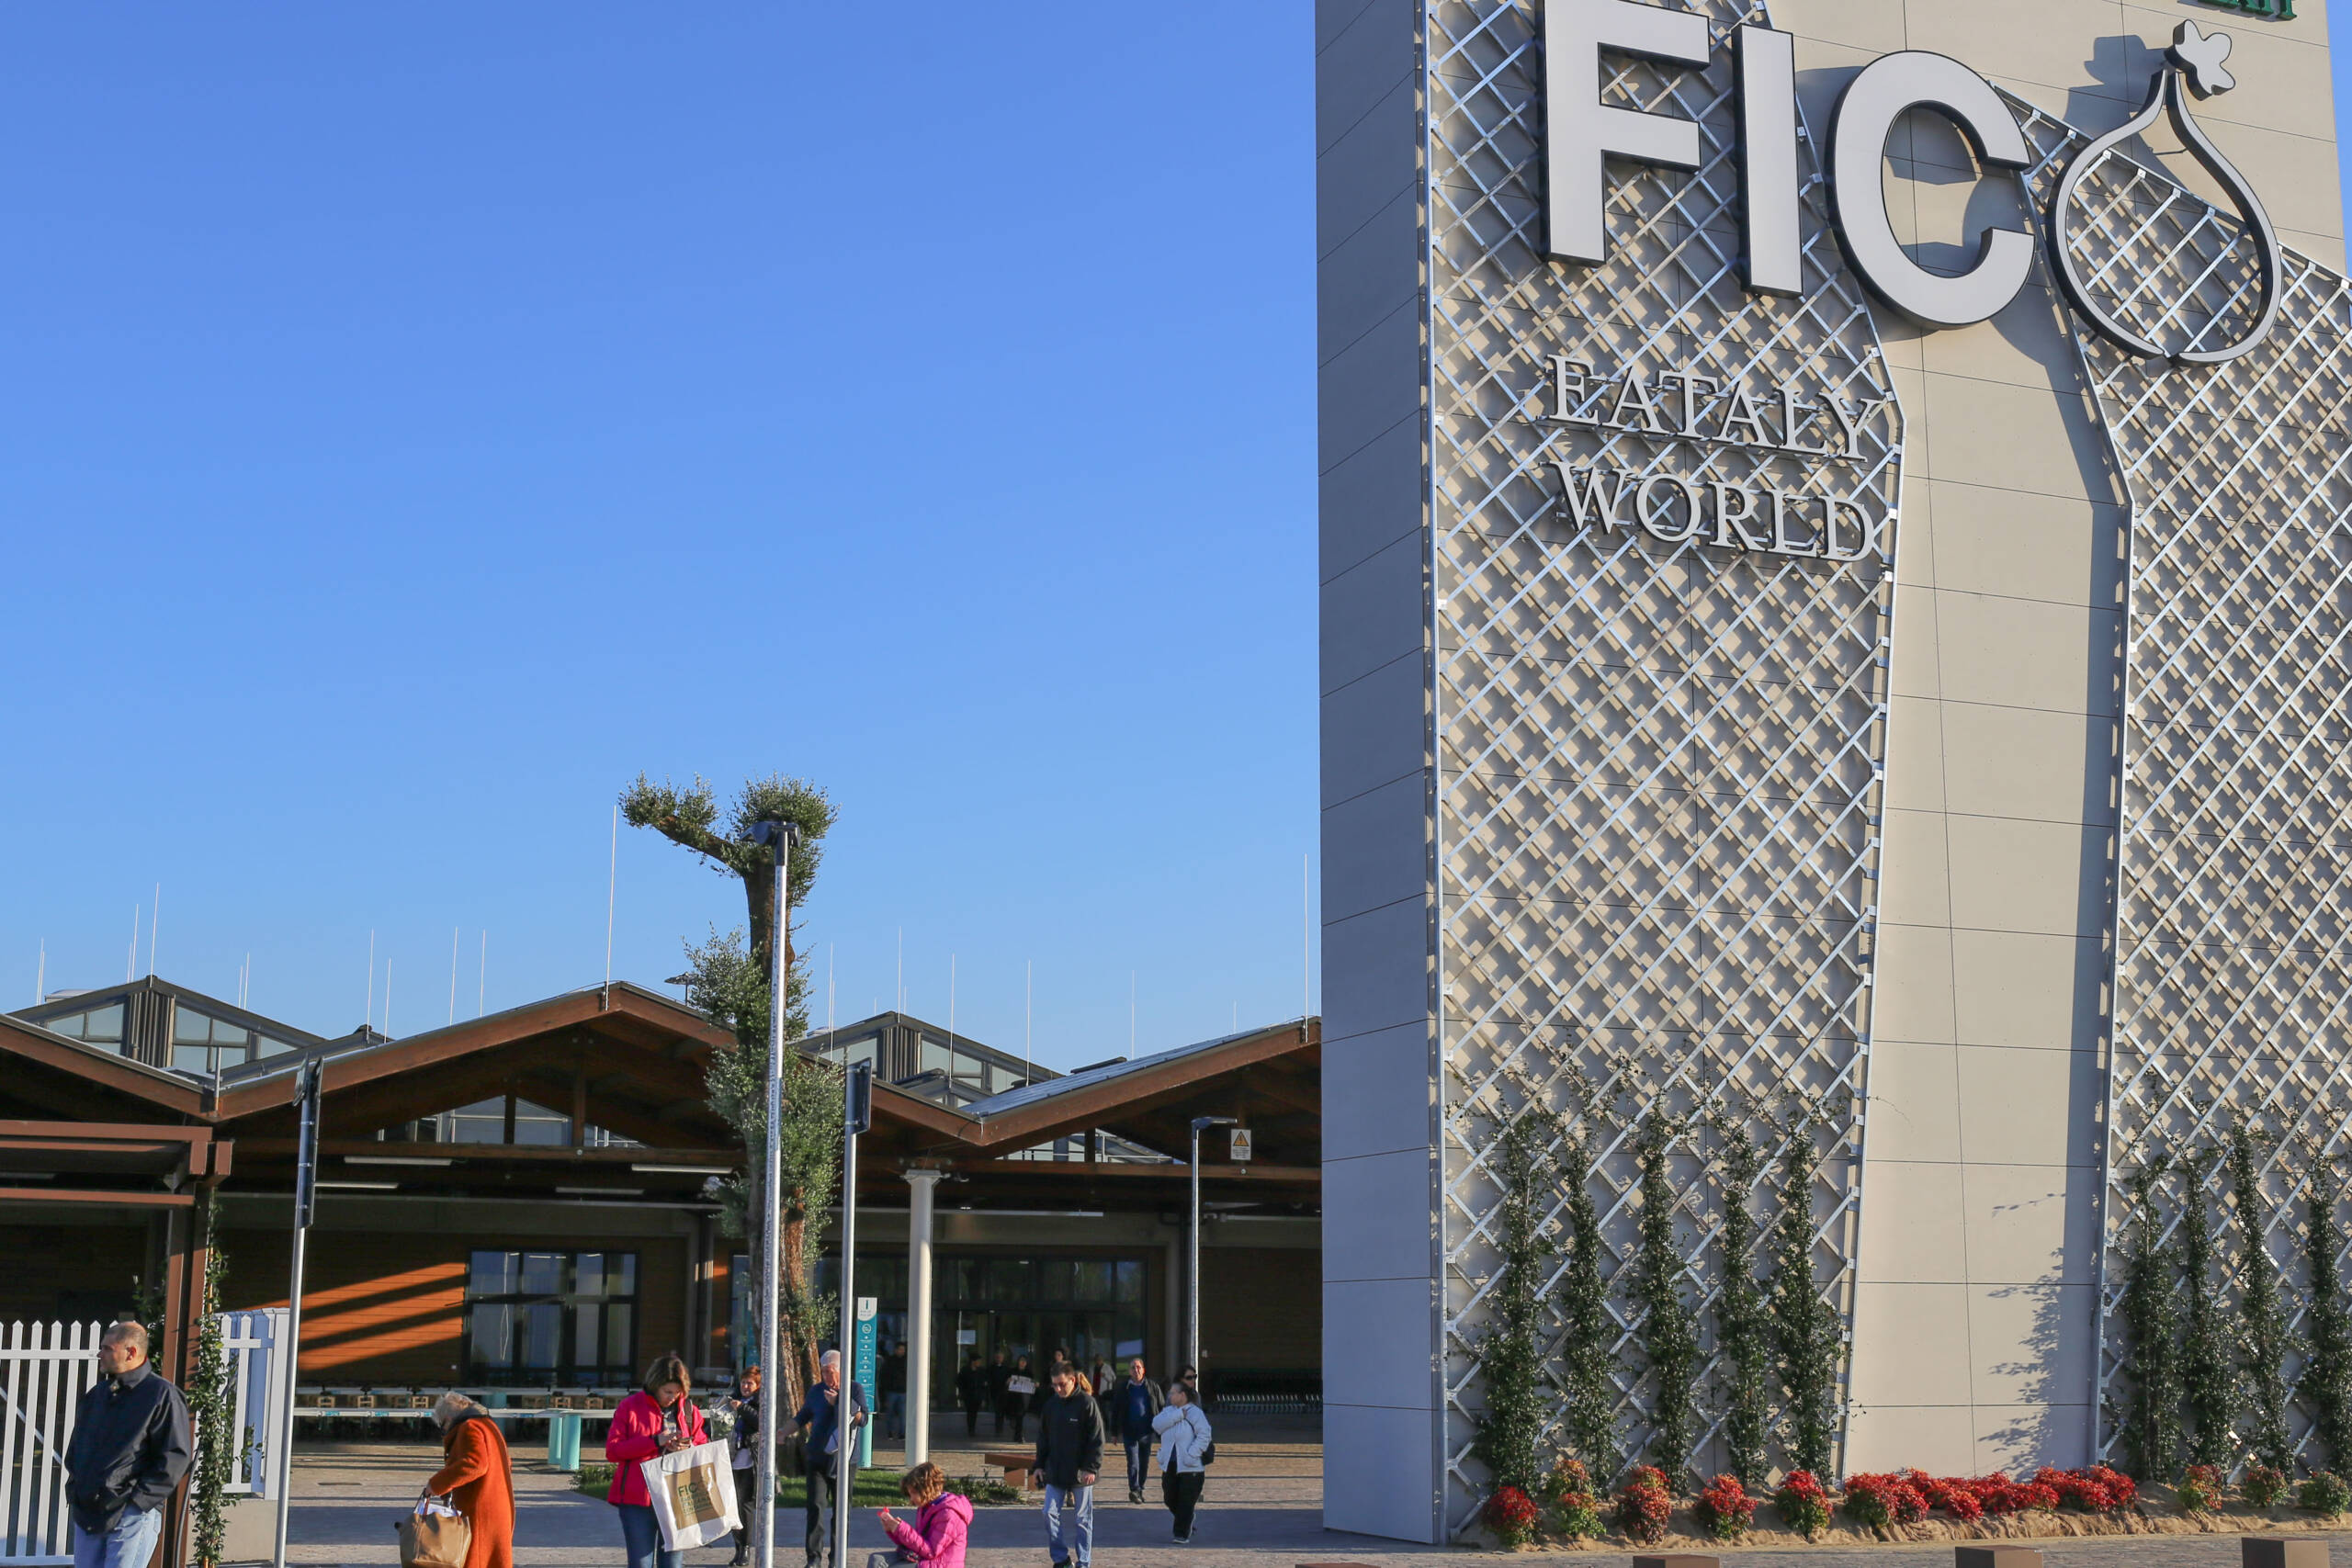 The Rise and Fall of FICO Eataly World: Lessons from an Ambitious Food Park Project